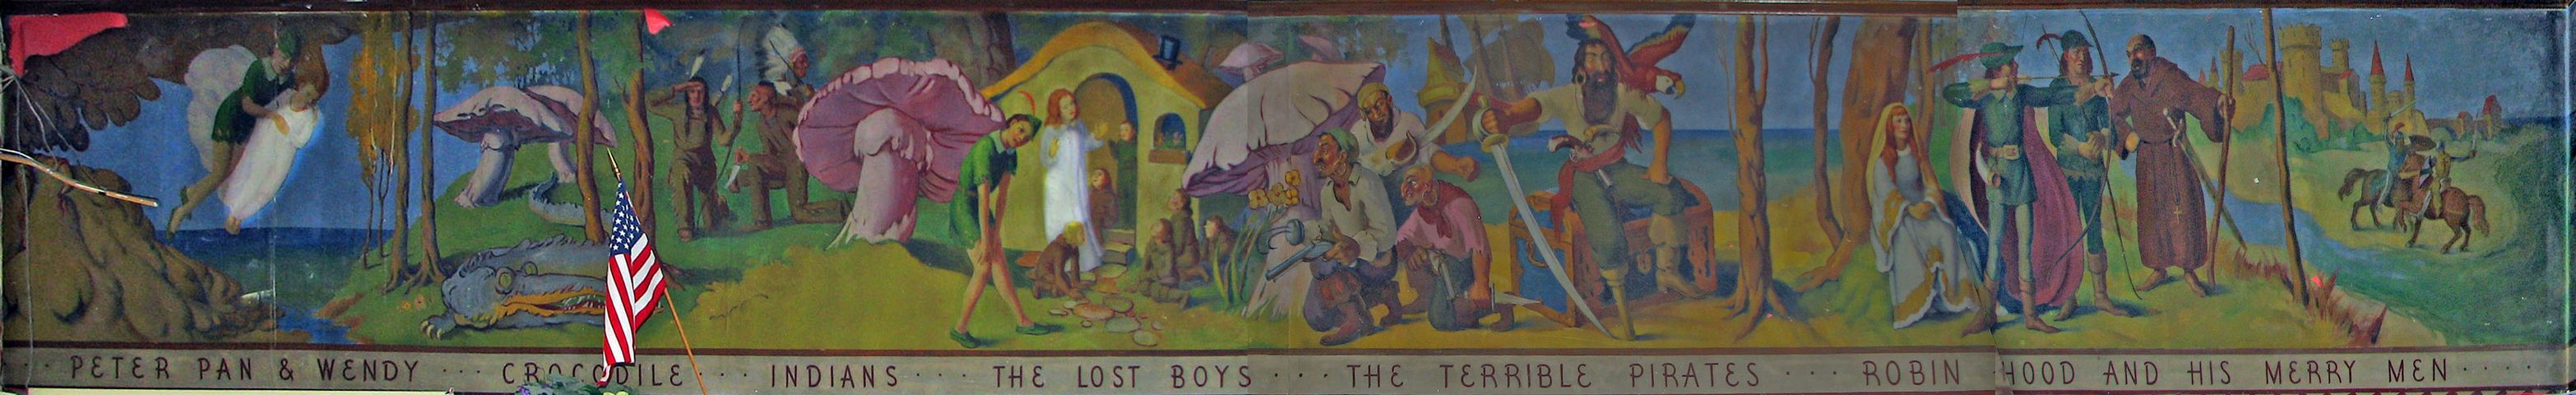 left half of surviving Barber School mural (Peter Pan & Wendy, crocodile, indians, the Lost Boys, the terrible pirates, Robin Hood and his merry men)